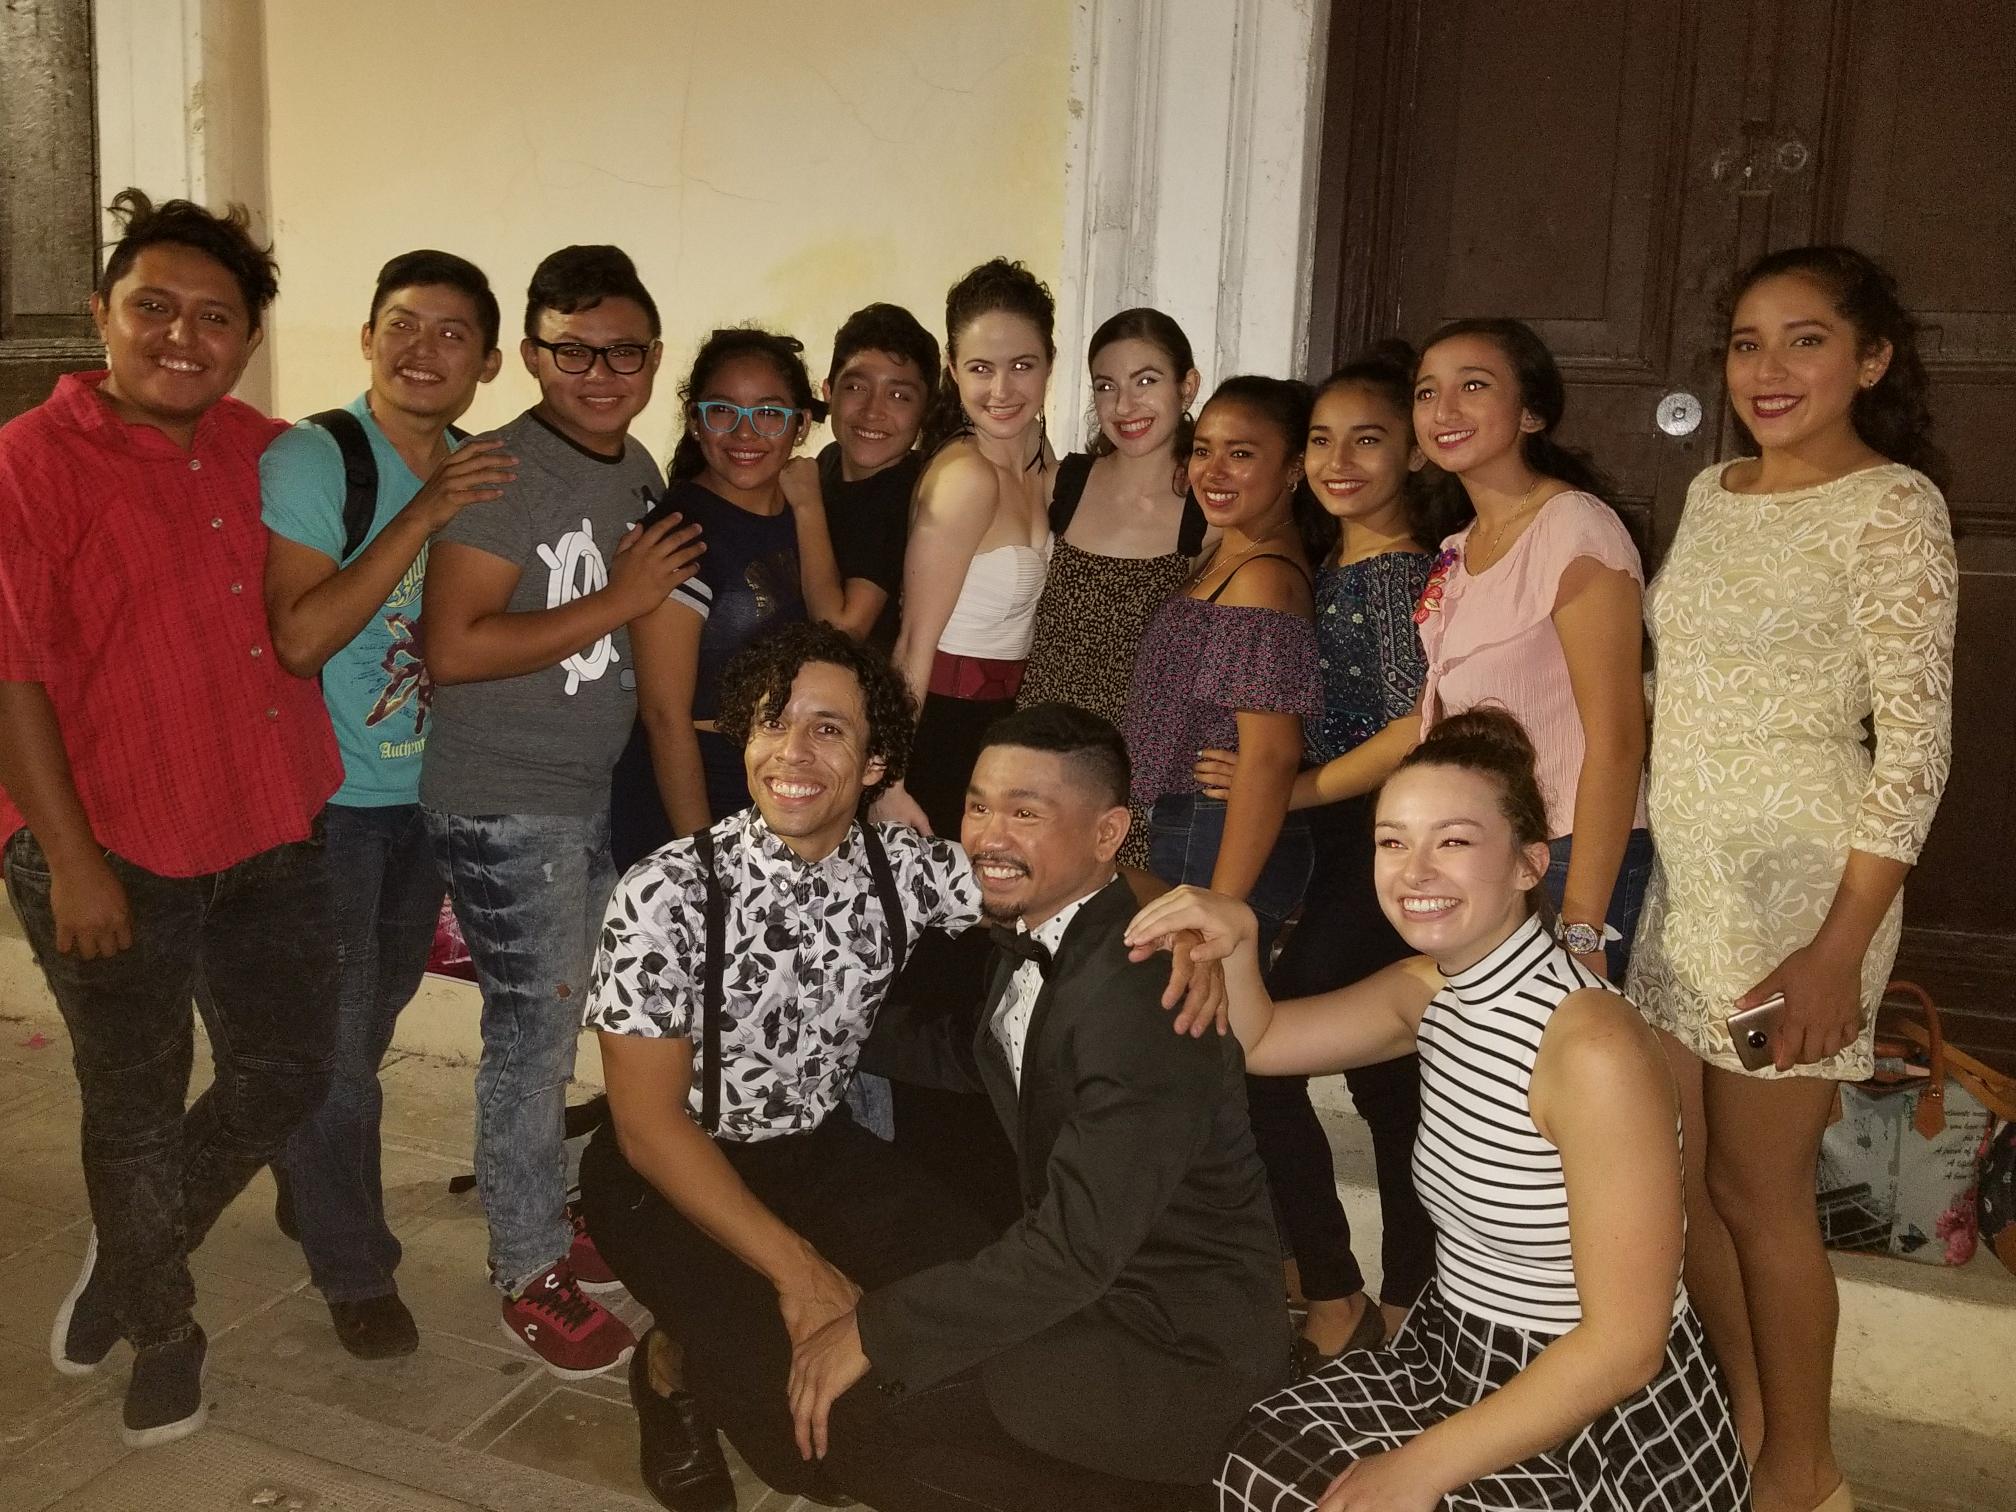 Eryc Taylor Dance Company posing with some students from one of their workshop held in Chocholá.